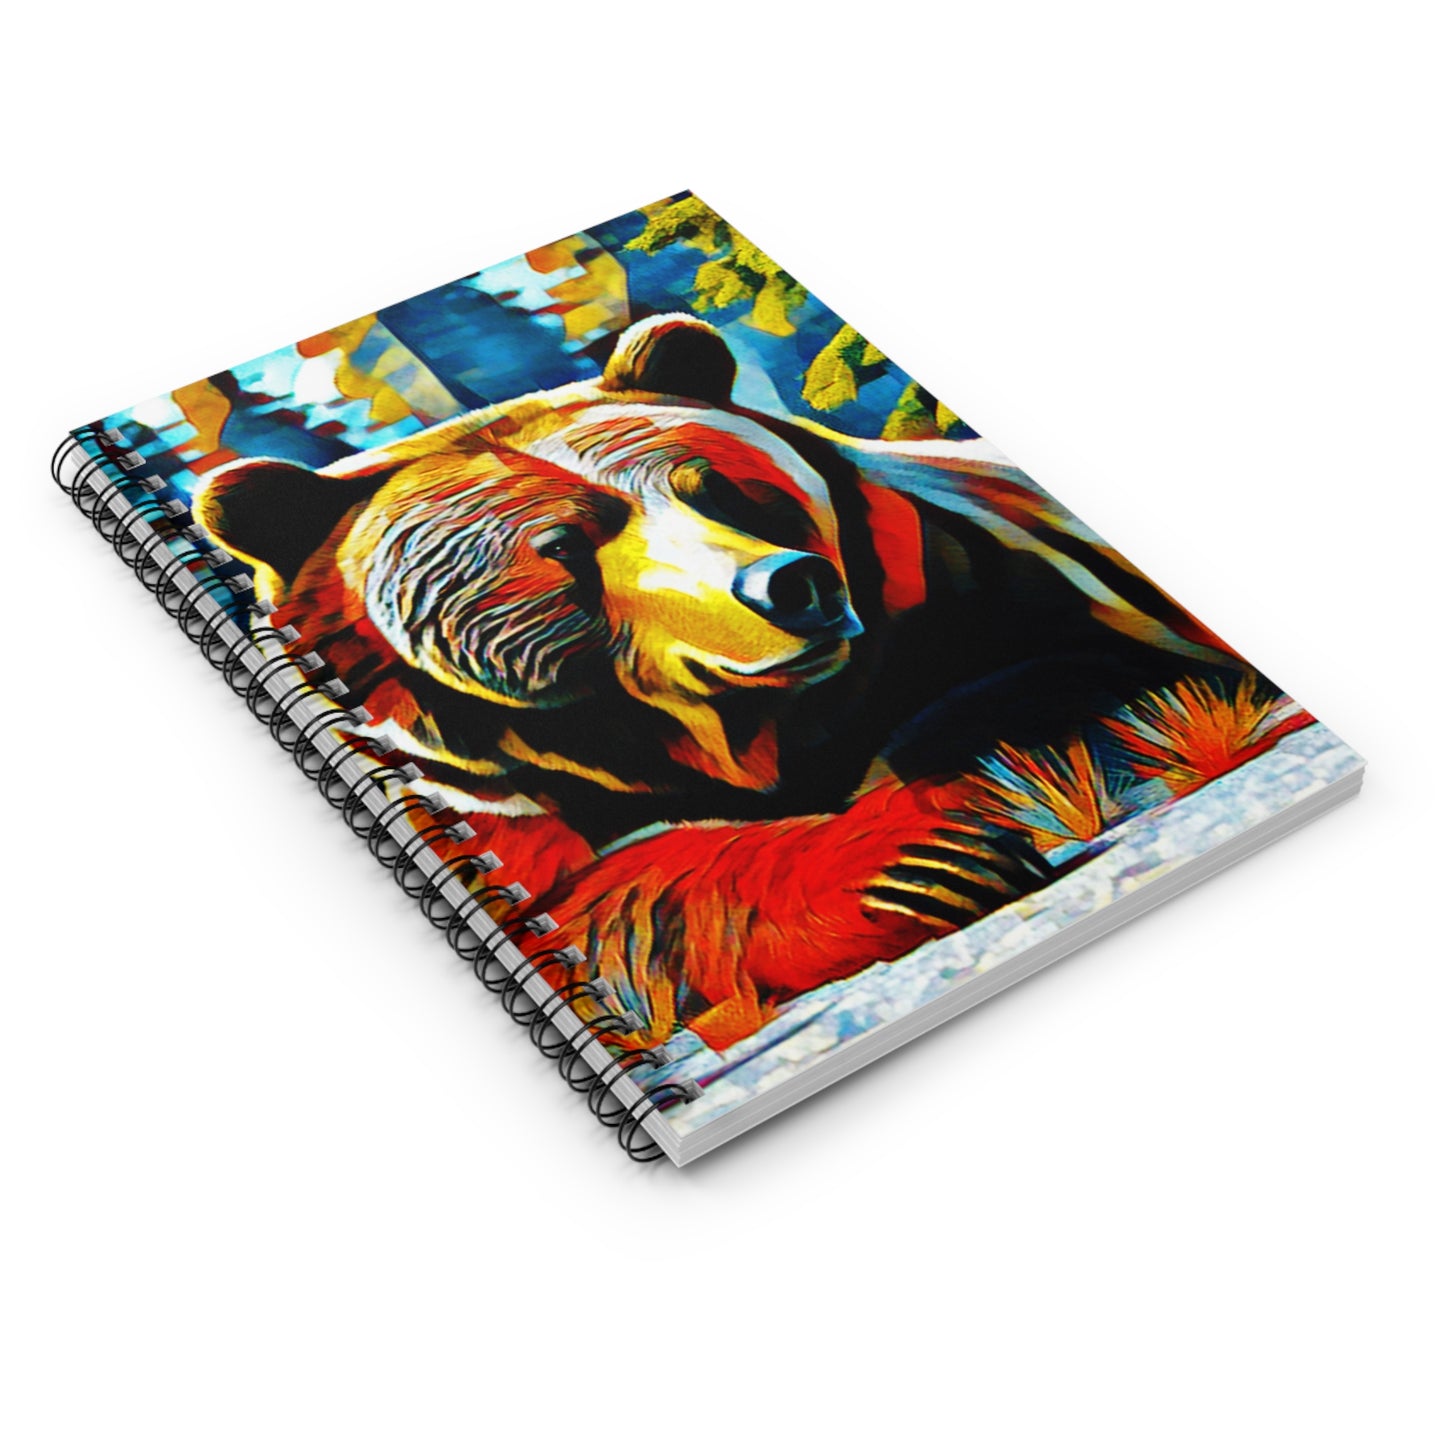 Grizzly Bear Artistic Spiral Journal Notebook - Ruled Line